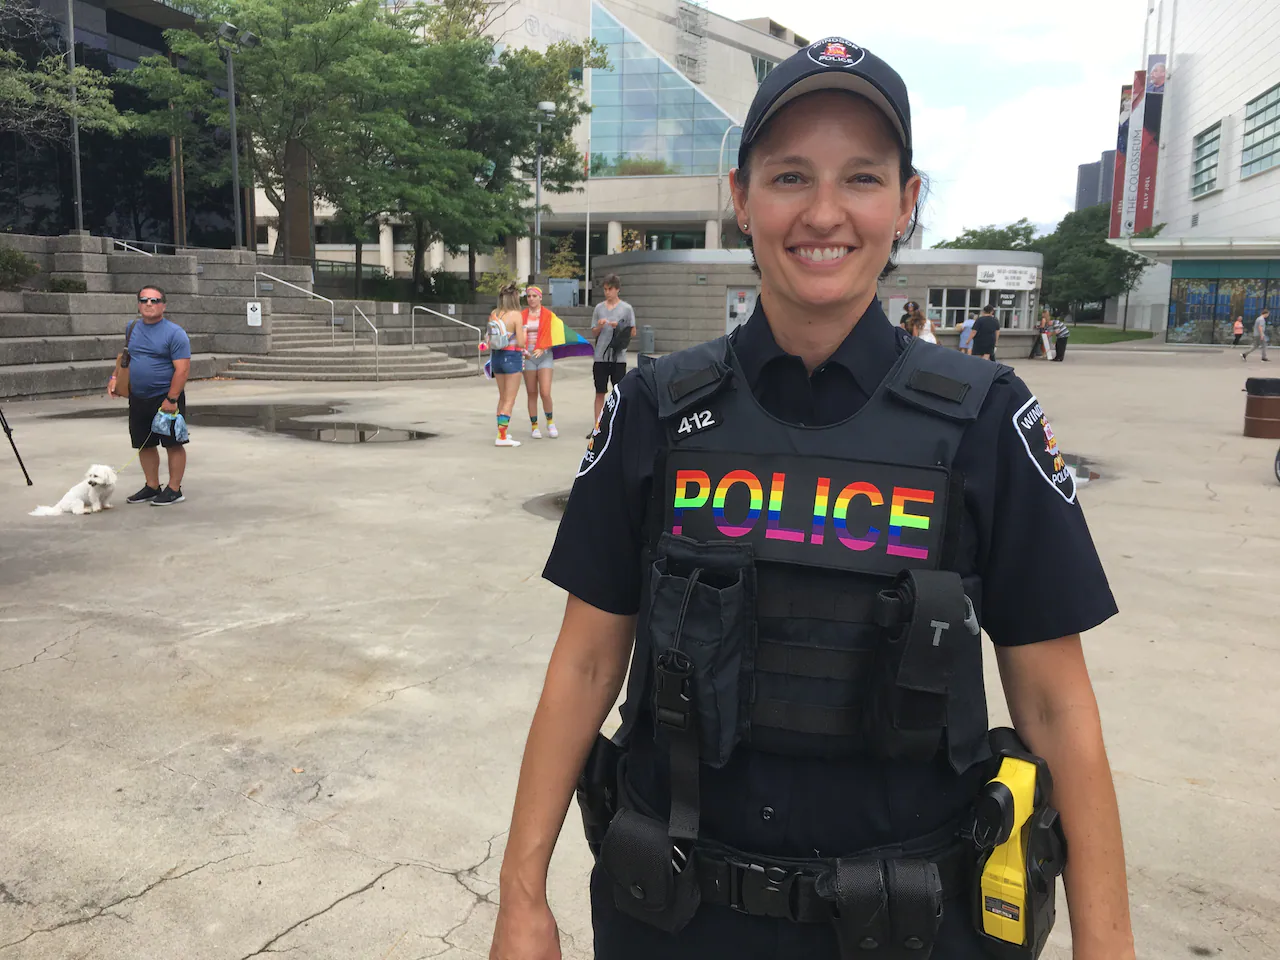 Windsor Police Introduces Rainbow Patch at Pridefest